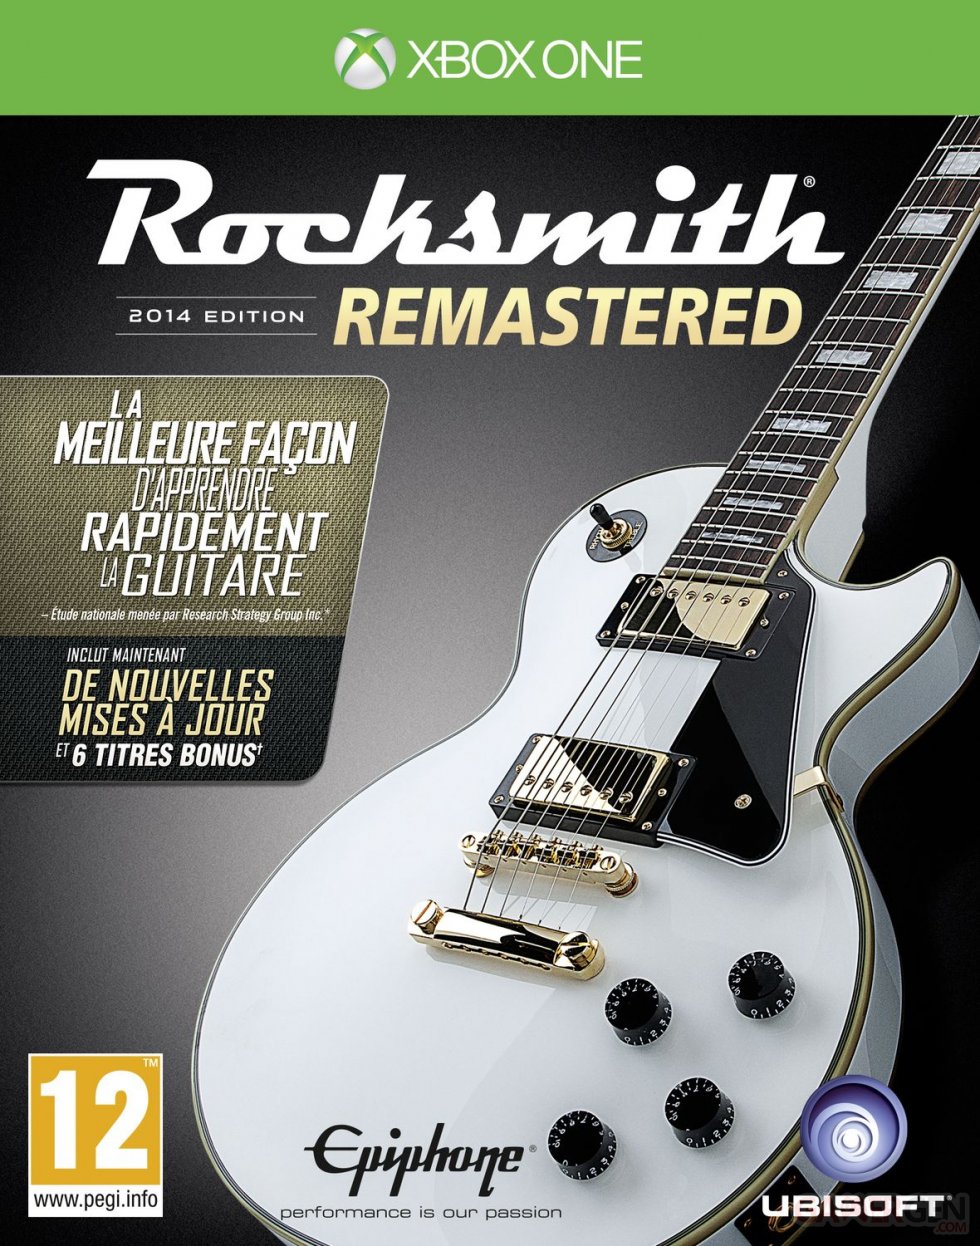 Rocksmith 2014 Edition Remastered jaquette Cover (3)